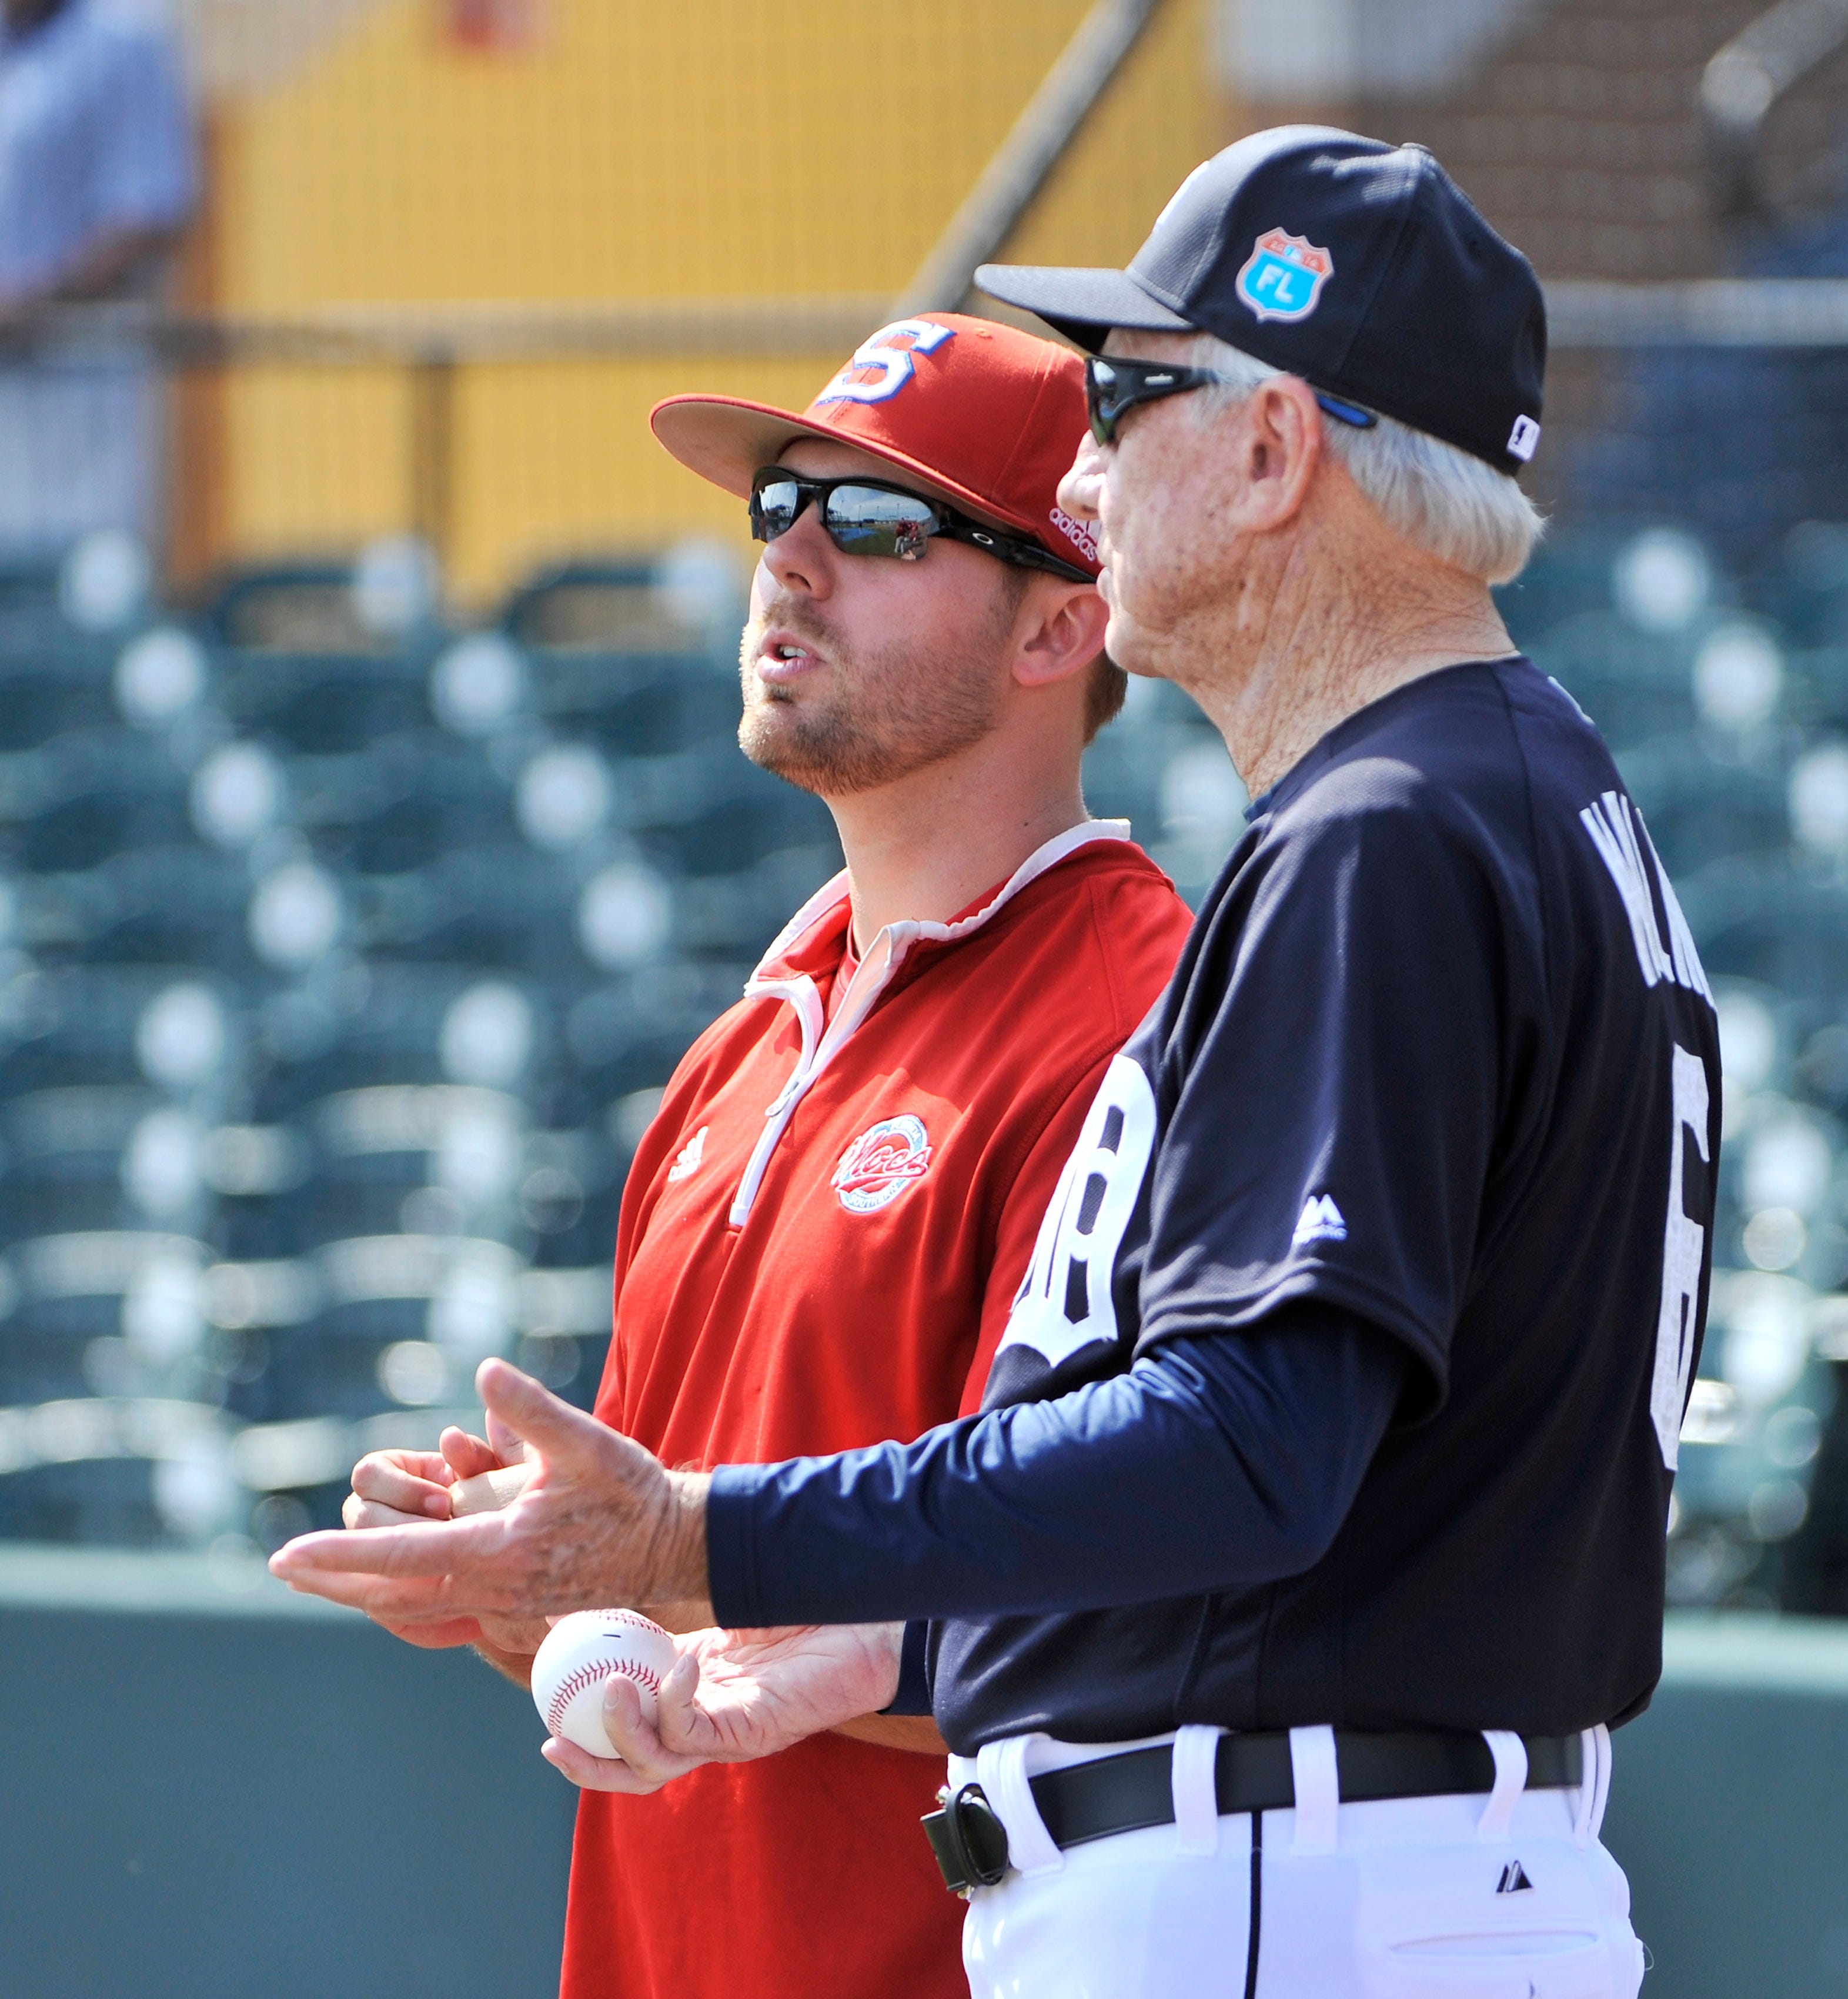 Florida Southern assistant coach Colin Kaline, left, talks with his grandfather, Al Kaline, during batting practice before a spring training exhibition game between the Detroit Tigers and Florida Southern College at Joker Marchant Stadium in Lakeland, Fla. on Feb. 29, 2016.